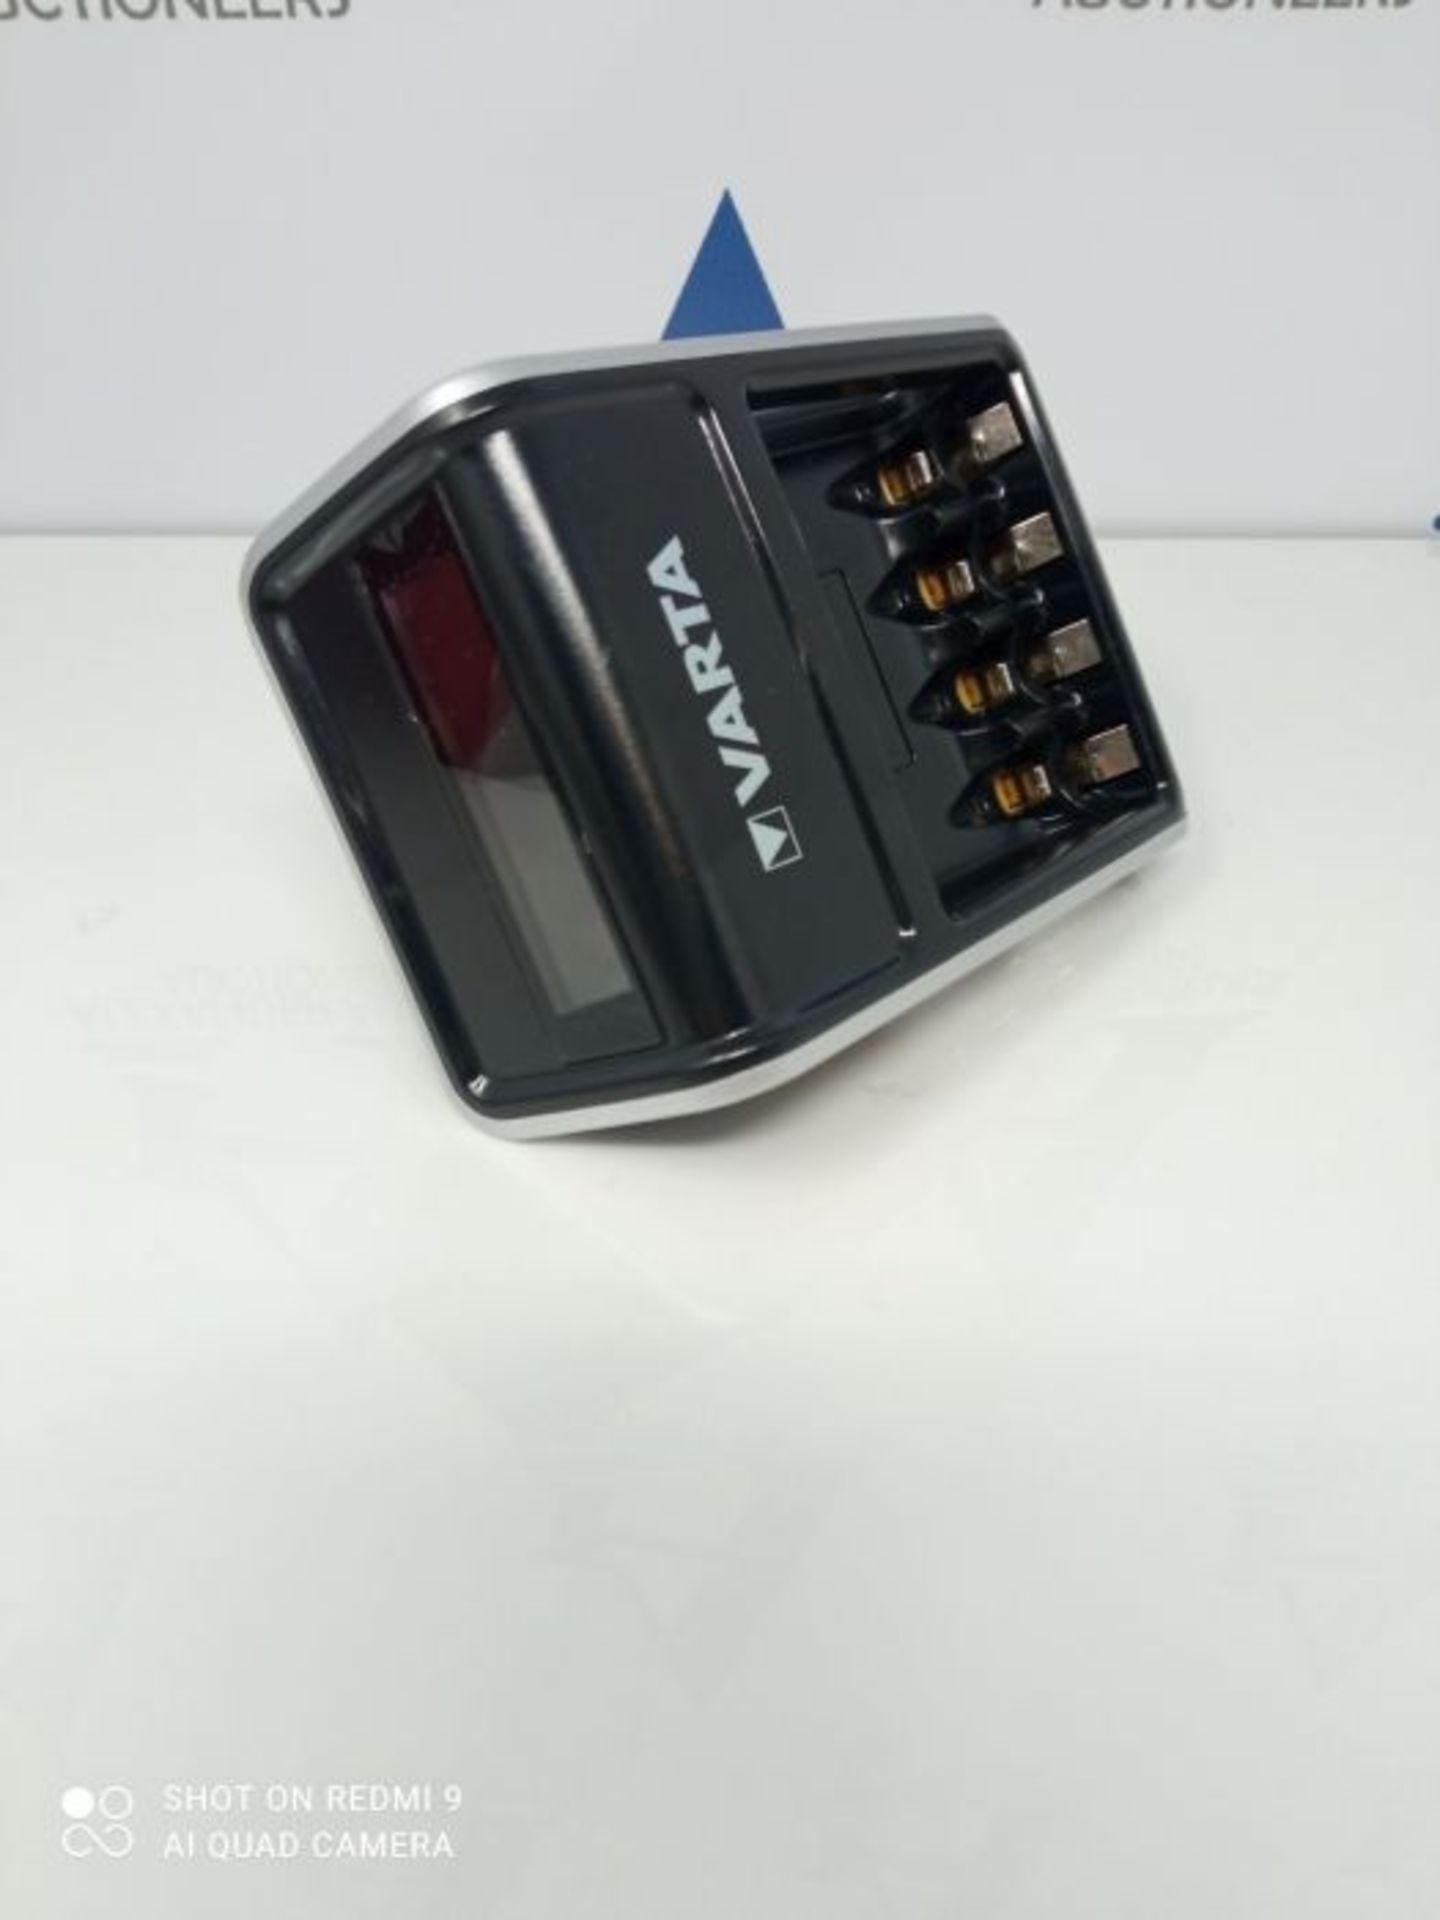 VARTA LCD Plug Charger for AA/AAA Batteries - Image 2 of 2